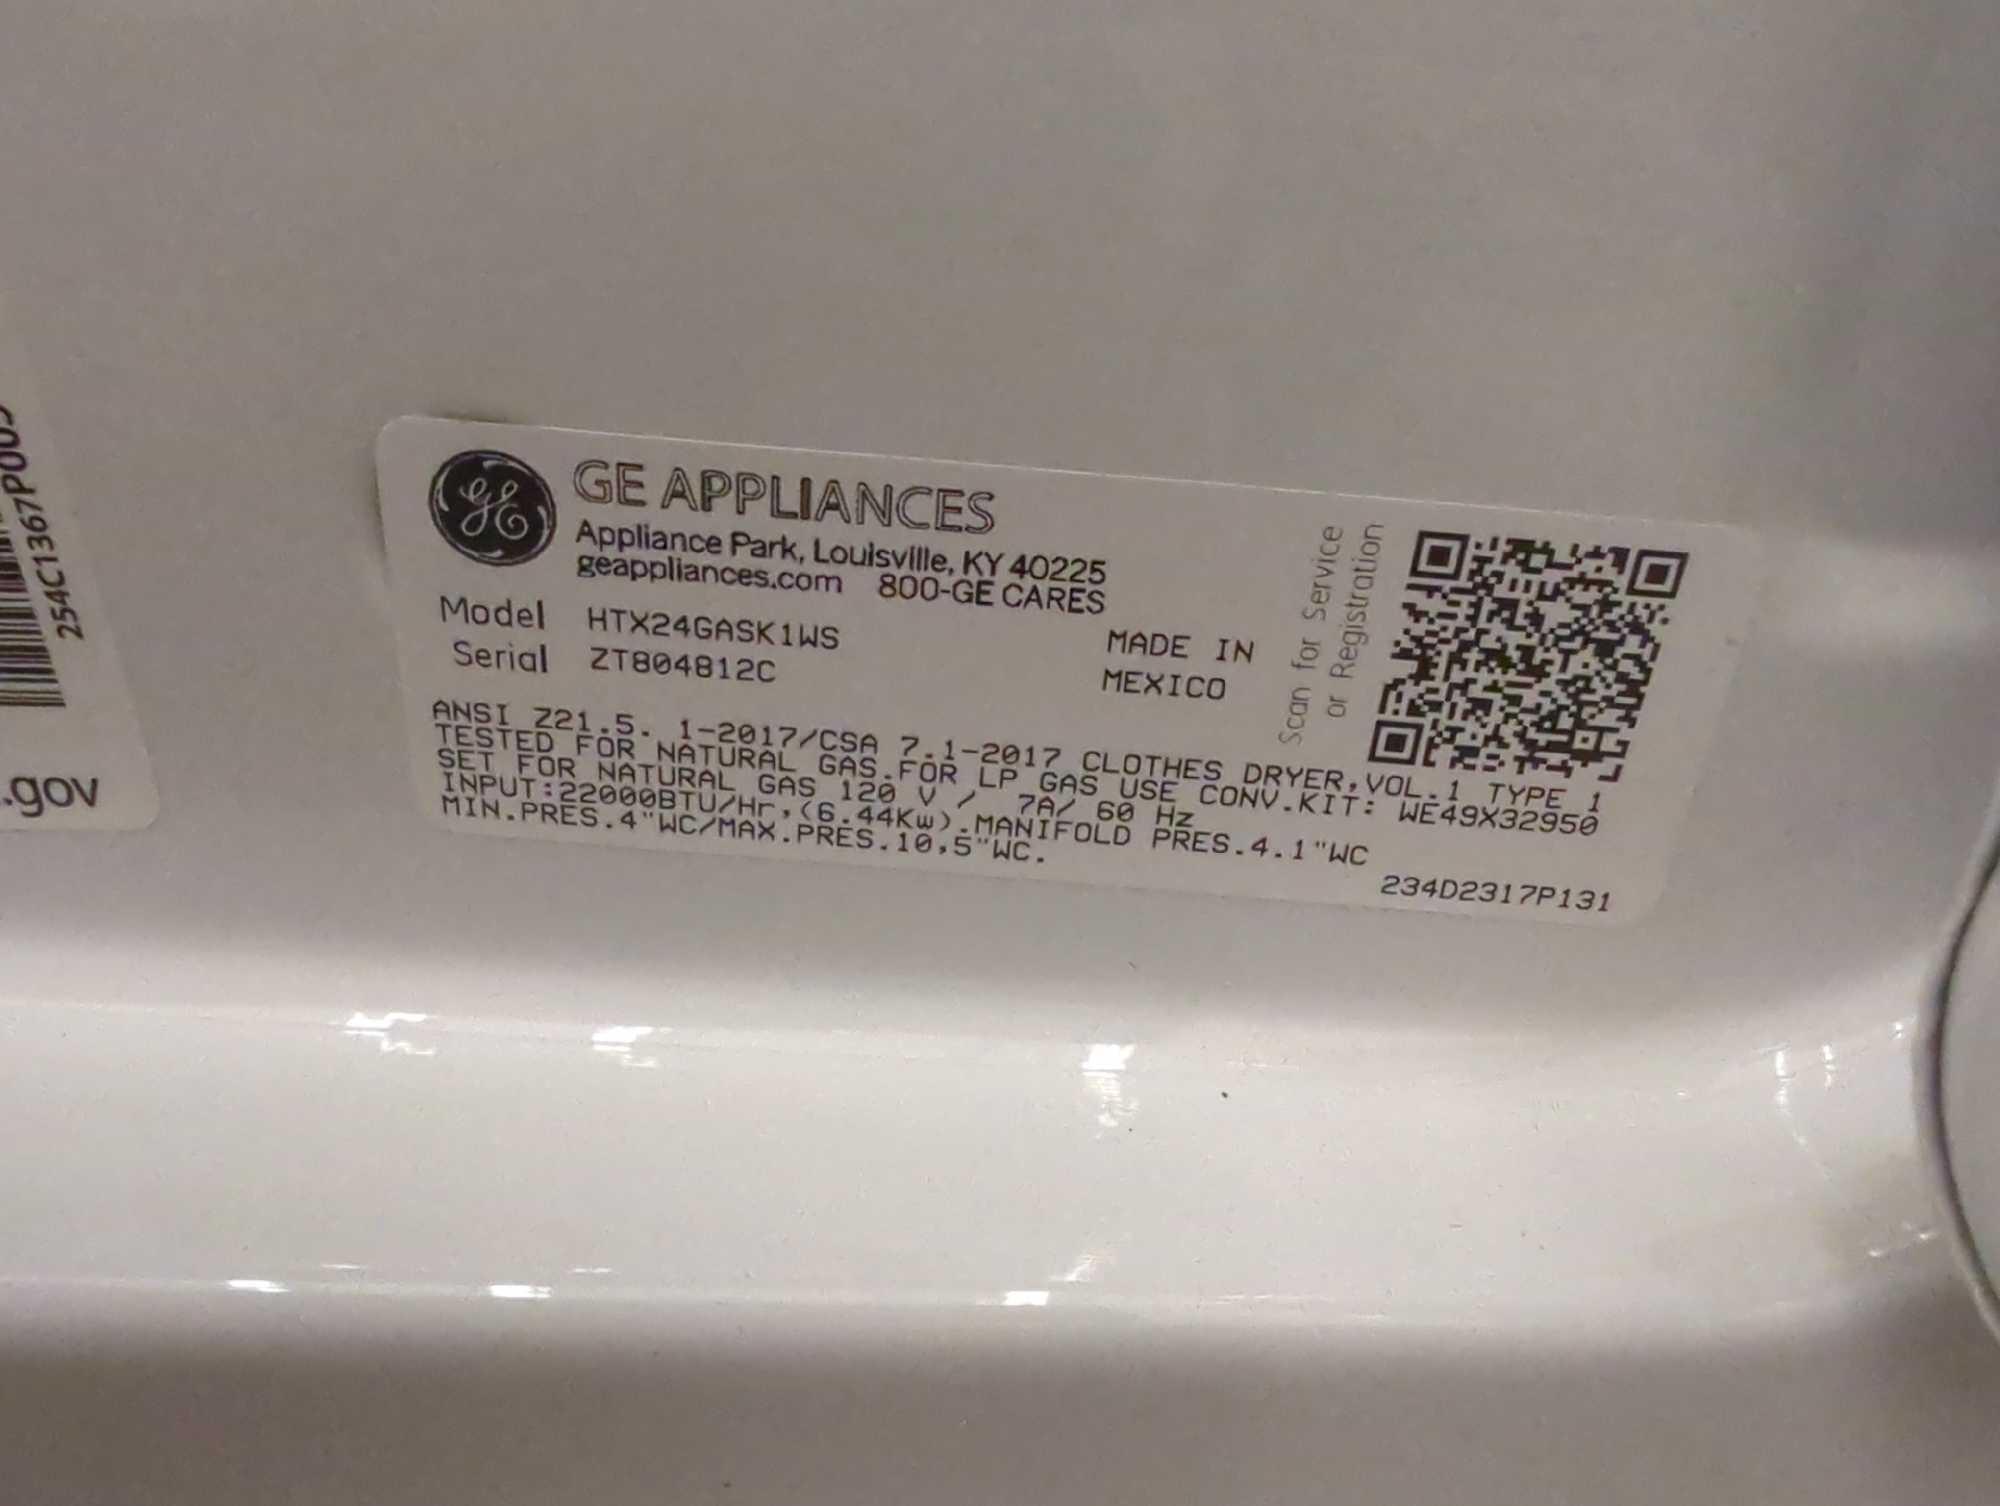 Hotpoint 6.2 cu. ft. vented Gas Dryer in White with Auto Dry, Appears to be Used Has Some Minor